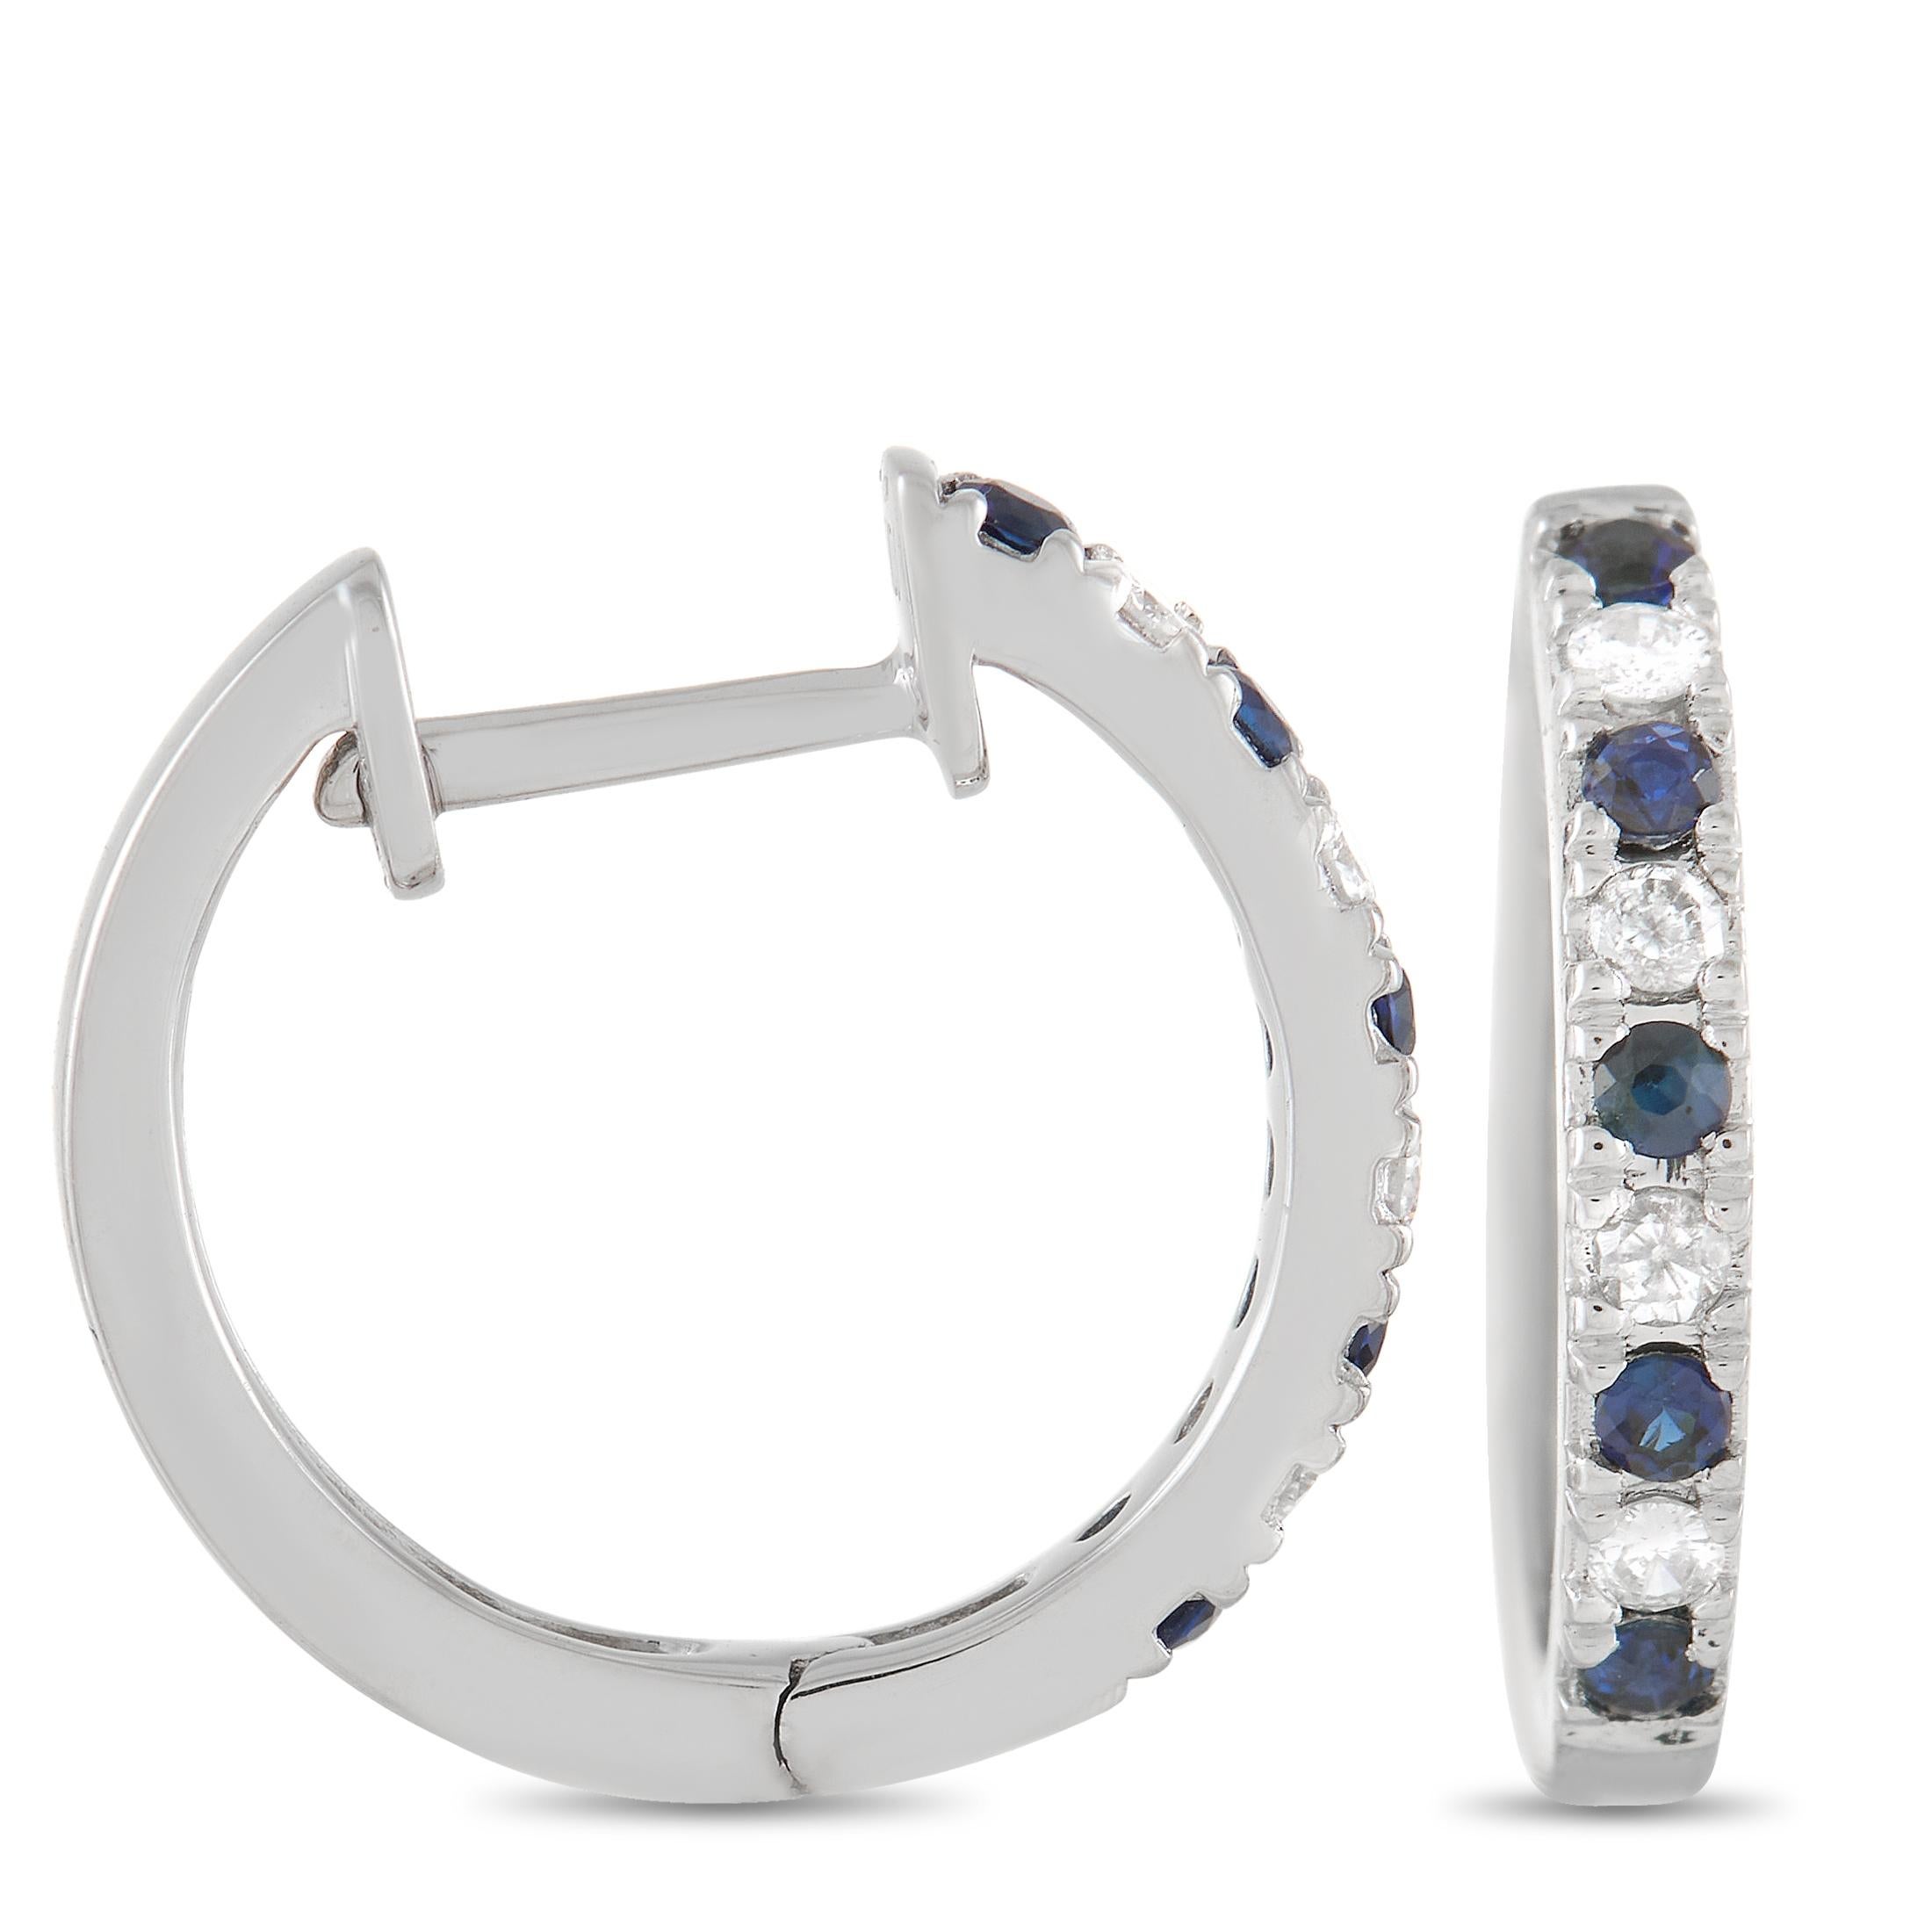 Simple and elegant in design, these 14K White Gold hoops will never go out of style. On each earring, you’ll find a row of alternating diamonds and sapphires that total 0.11 carats and 0.17 carats. Each one measures .5” round and will effortlessly